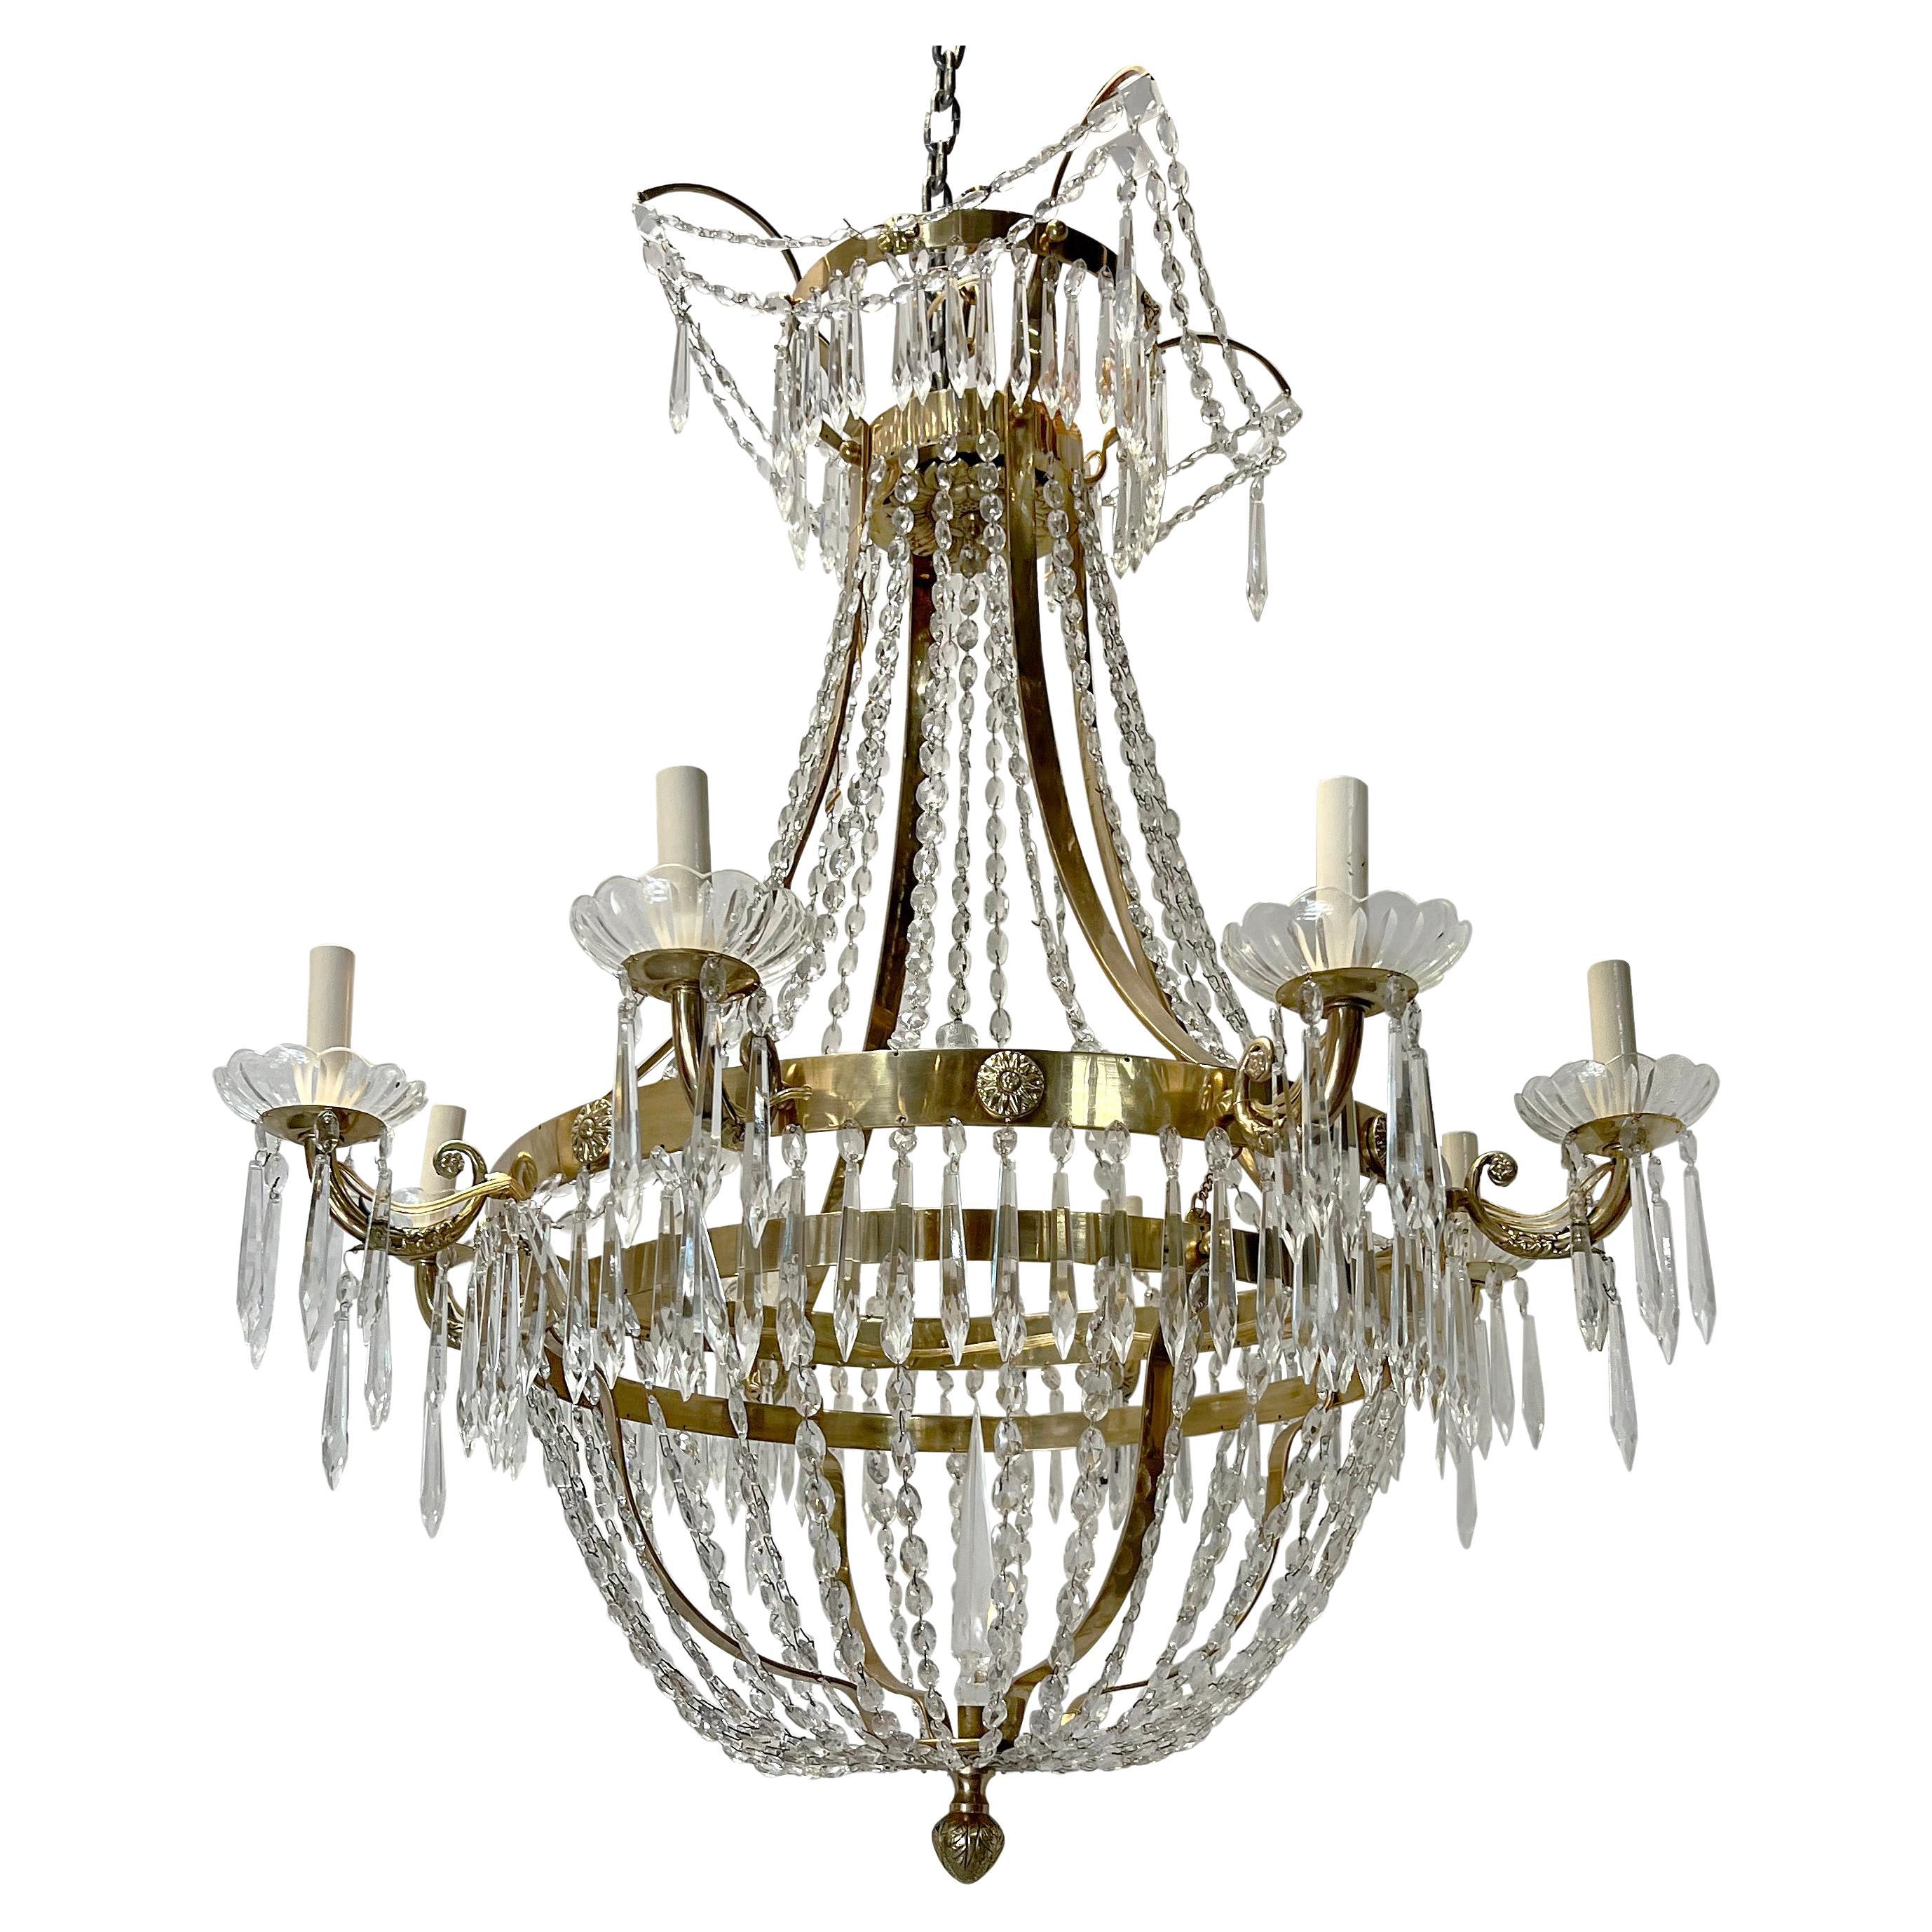 Pair of Neoclassic Gilt Swedish Chandeliers, Sold Individually